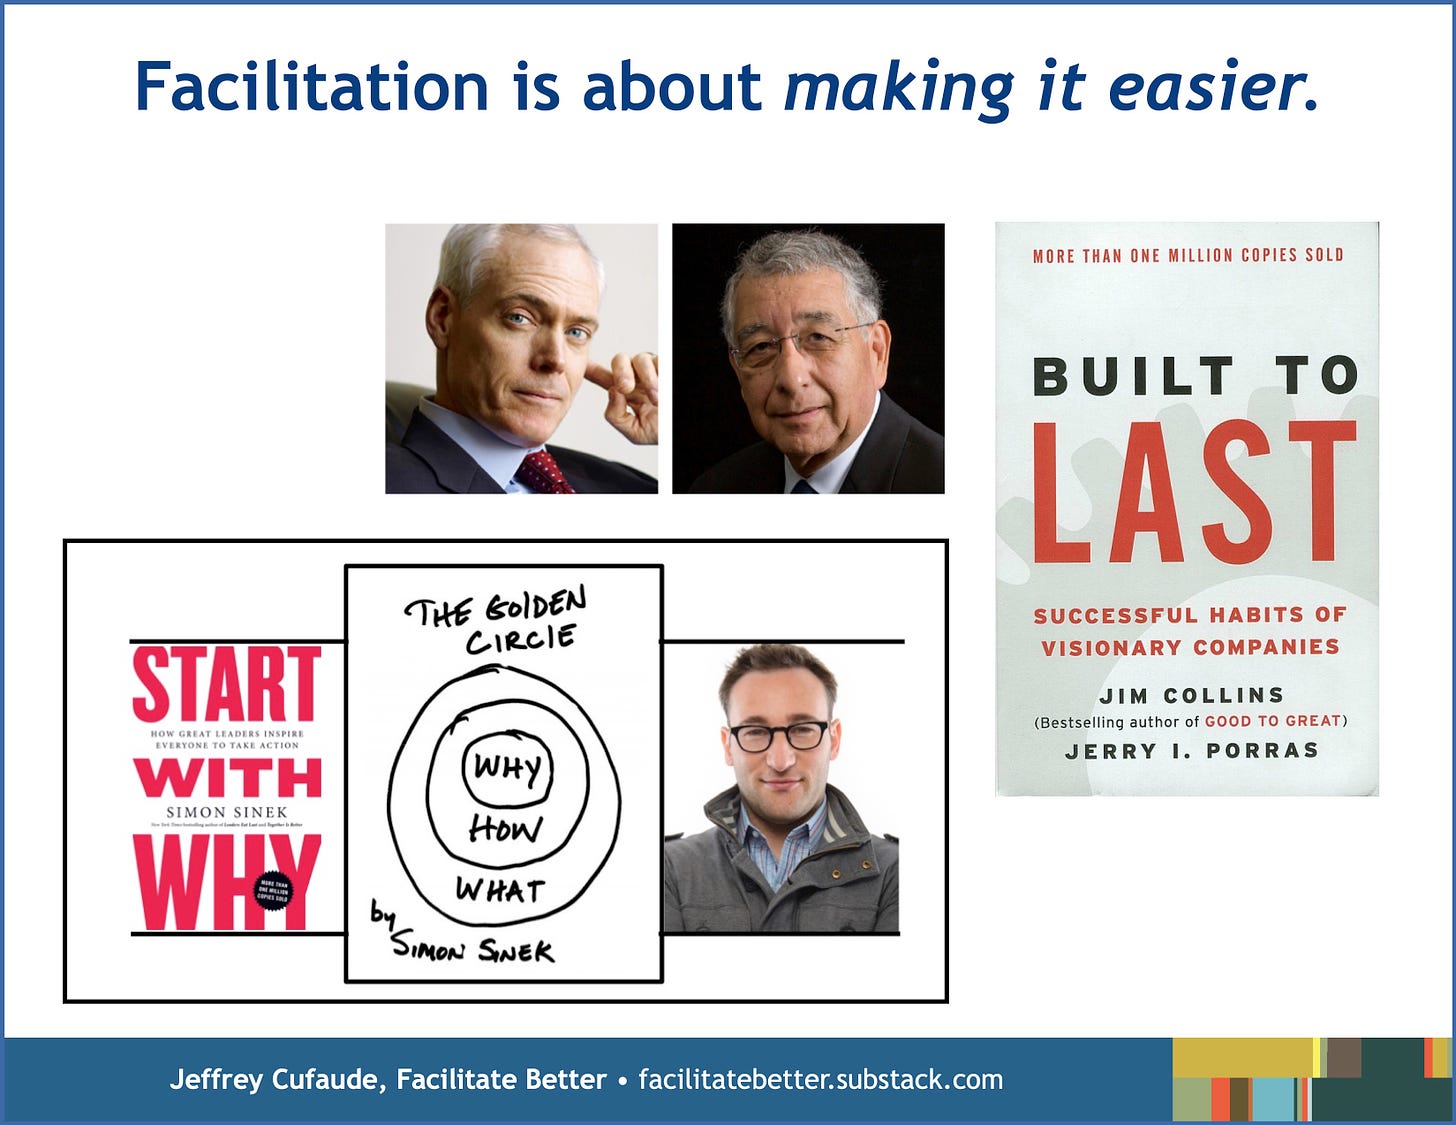 Slide with pictures of the authors Jim Collins and Jerry Porras and the dust jacket for their book, Built to Last.  Below these pictures are pictures of the author Simon Sinek, the dust Jacket for his book Start With Why, and a three-ring bullseye image for his Golden Circle with WHY at the center, HOW in the next ring, and WHAT in the outermost ring.